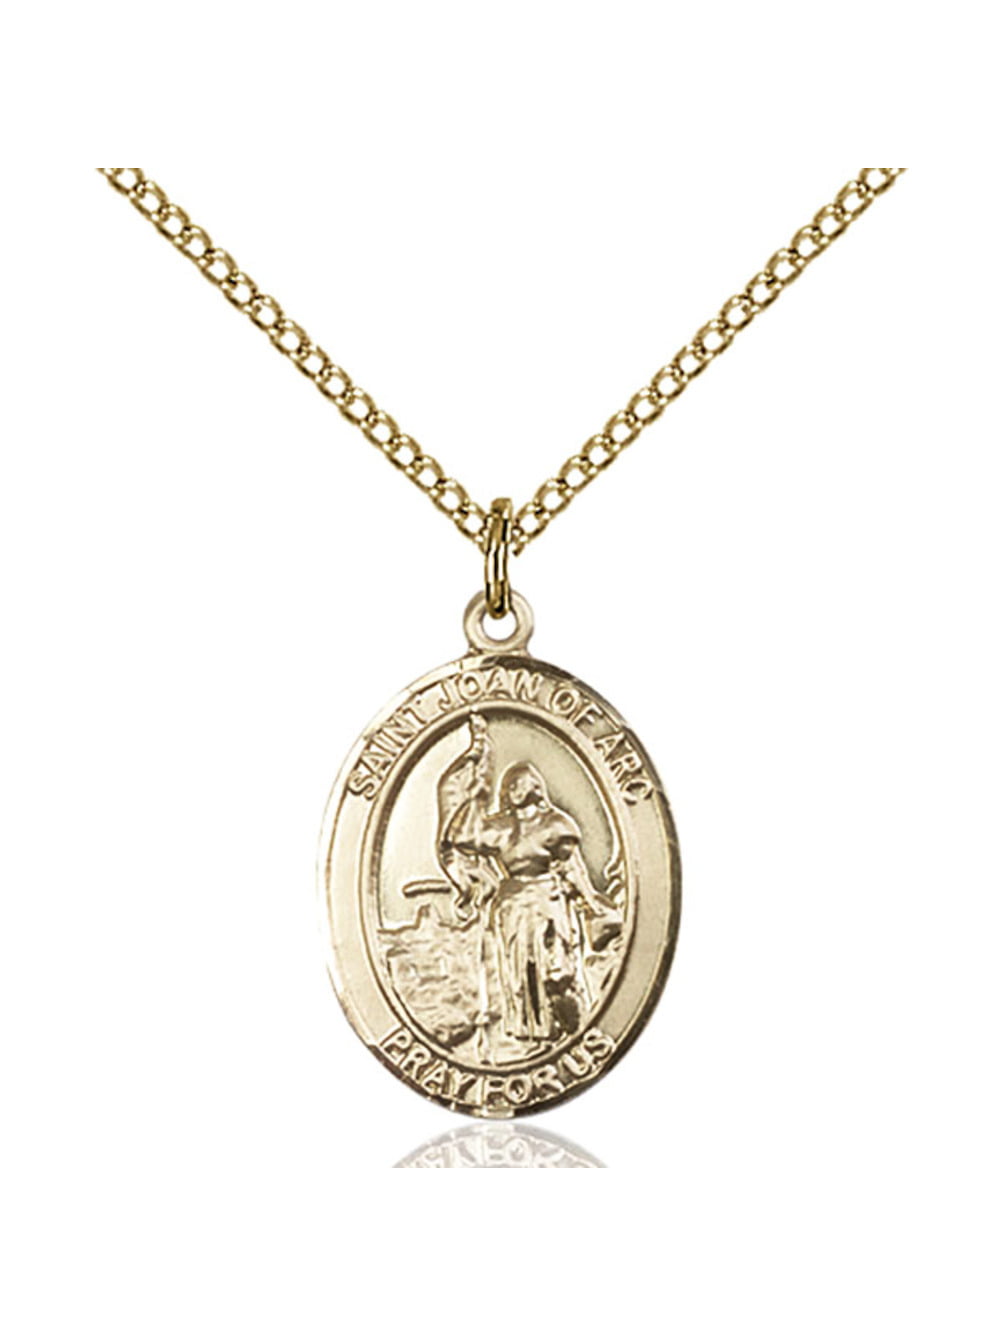 Bonyak Jewelry 18 Inch Hamilton Gold Plated Necklace w/ 6mm Blue March Birth Month Stone Beads and Saint Christopher/Tennis